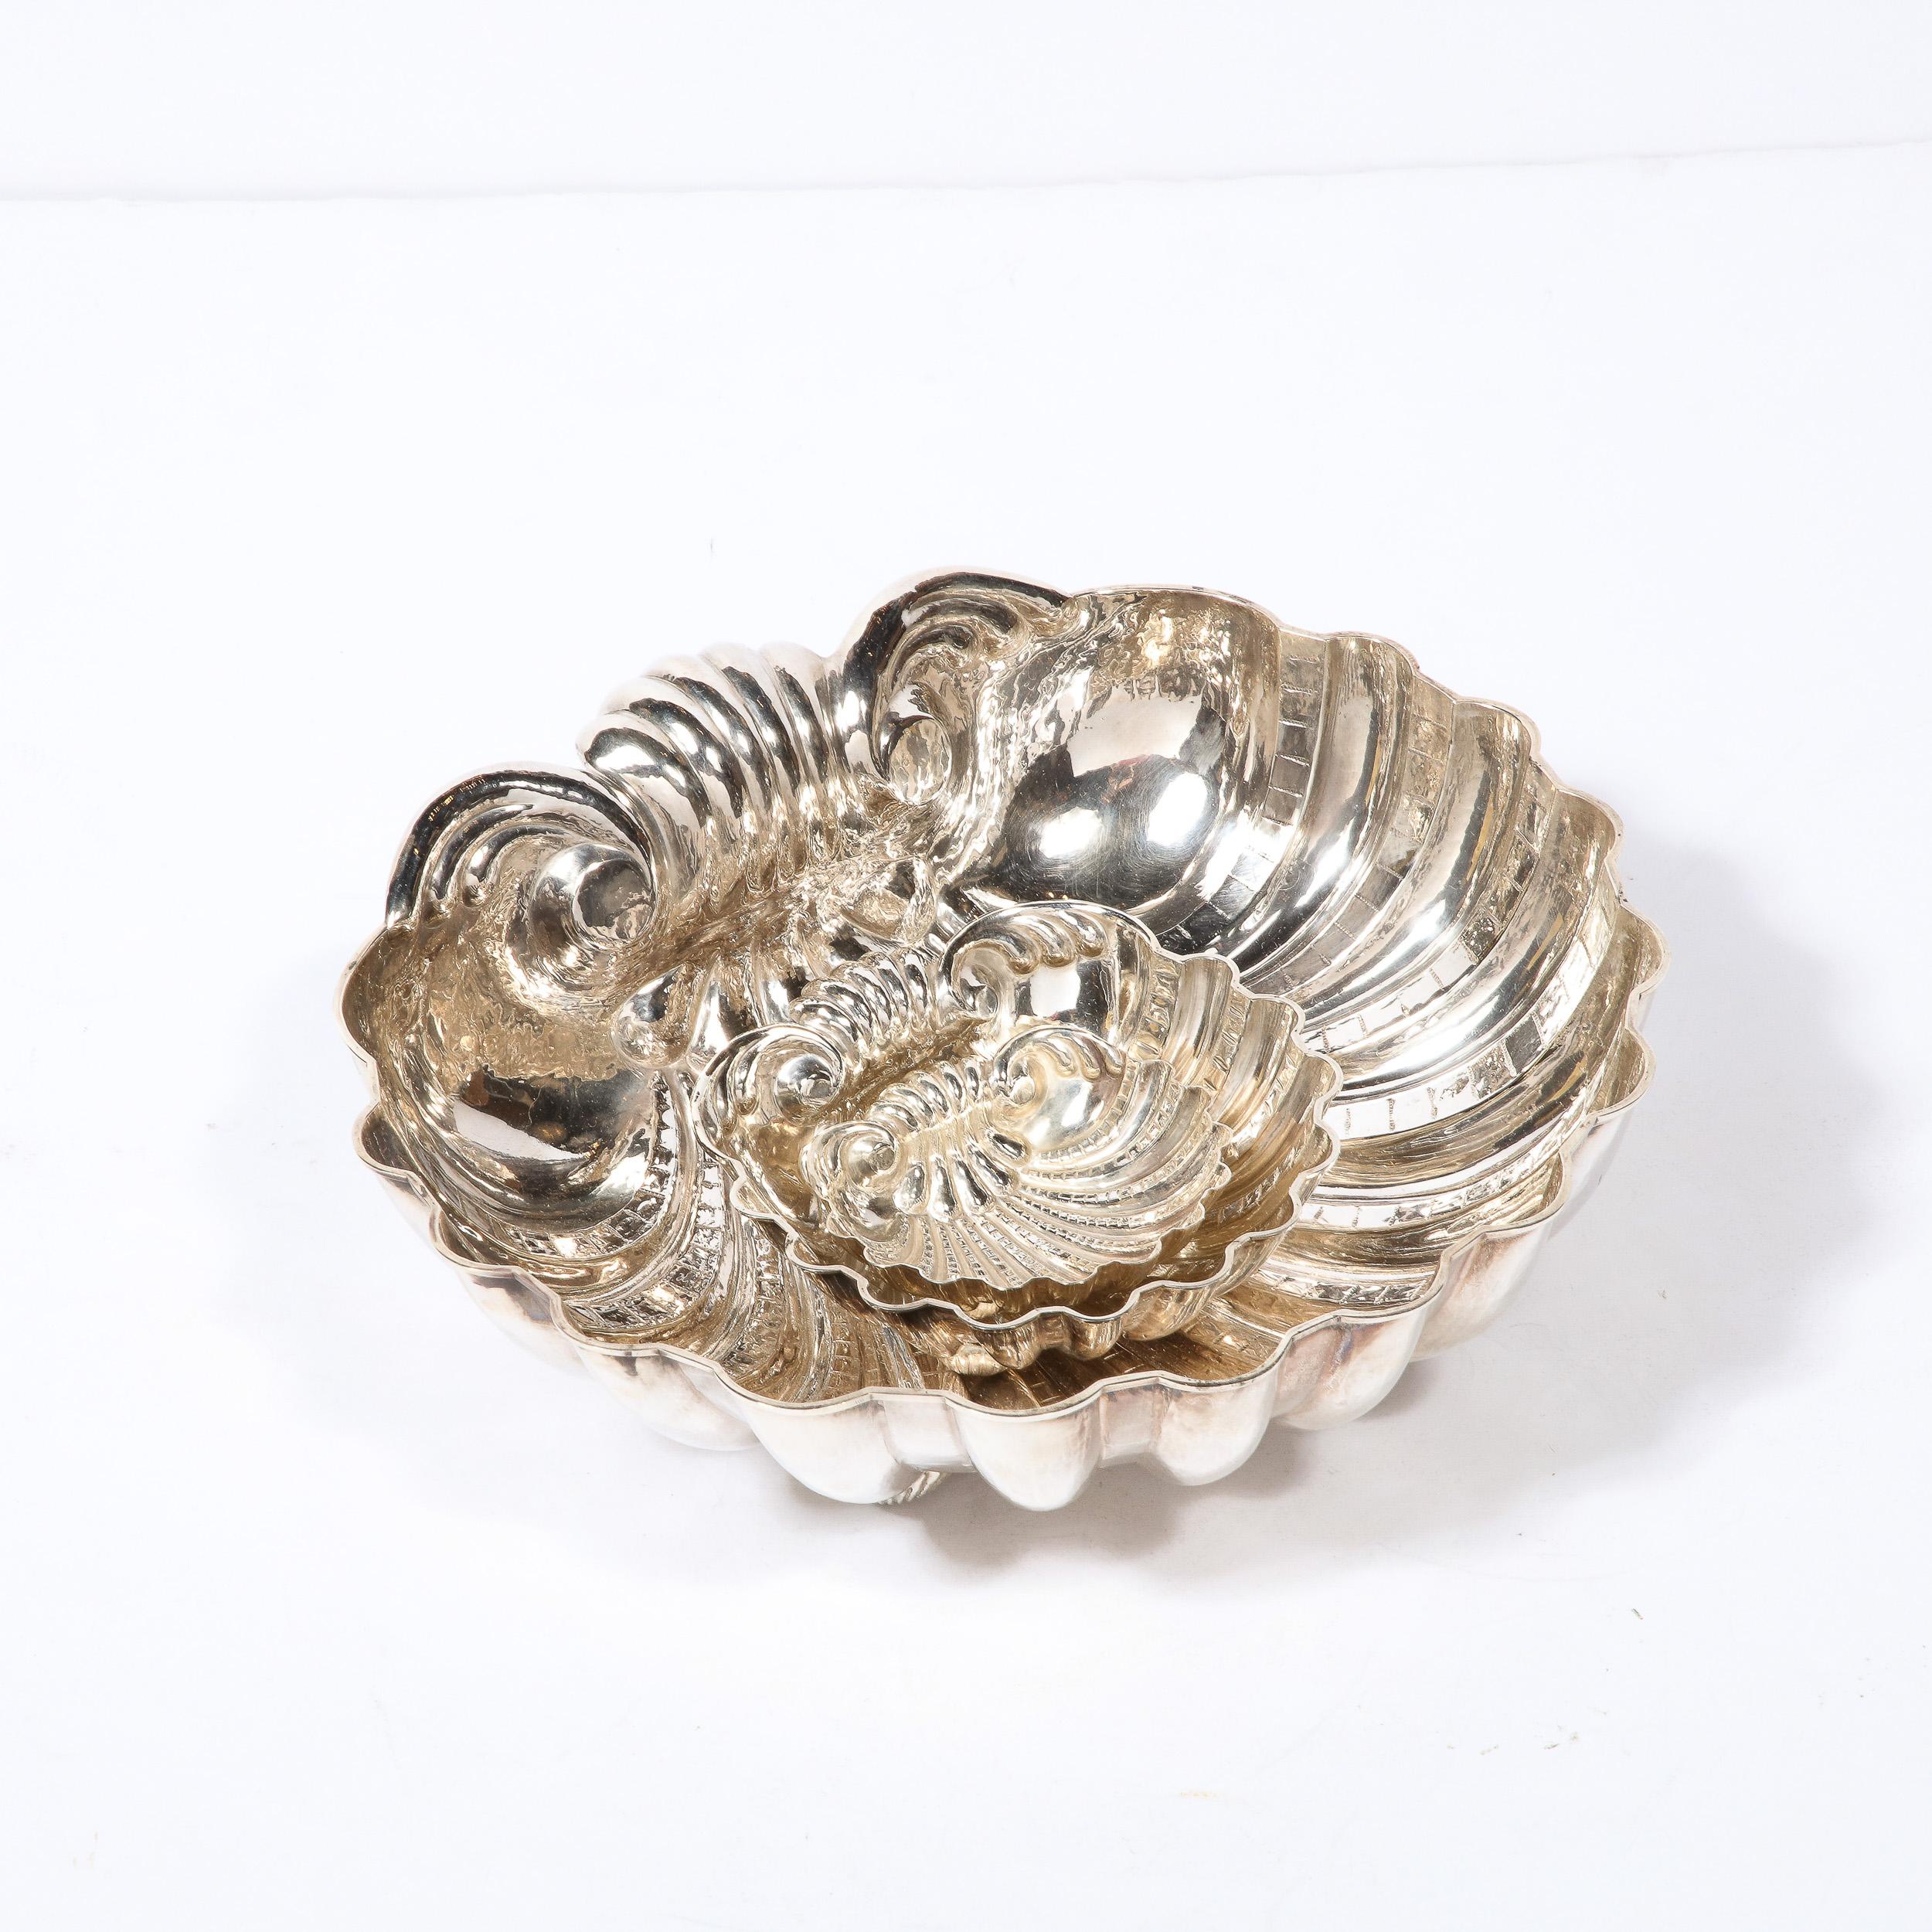 Mid-Century Modern Three Hand-Wrought Sterling Silver Scallop Form Bowls Signed by Missiaglia For Sale